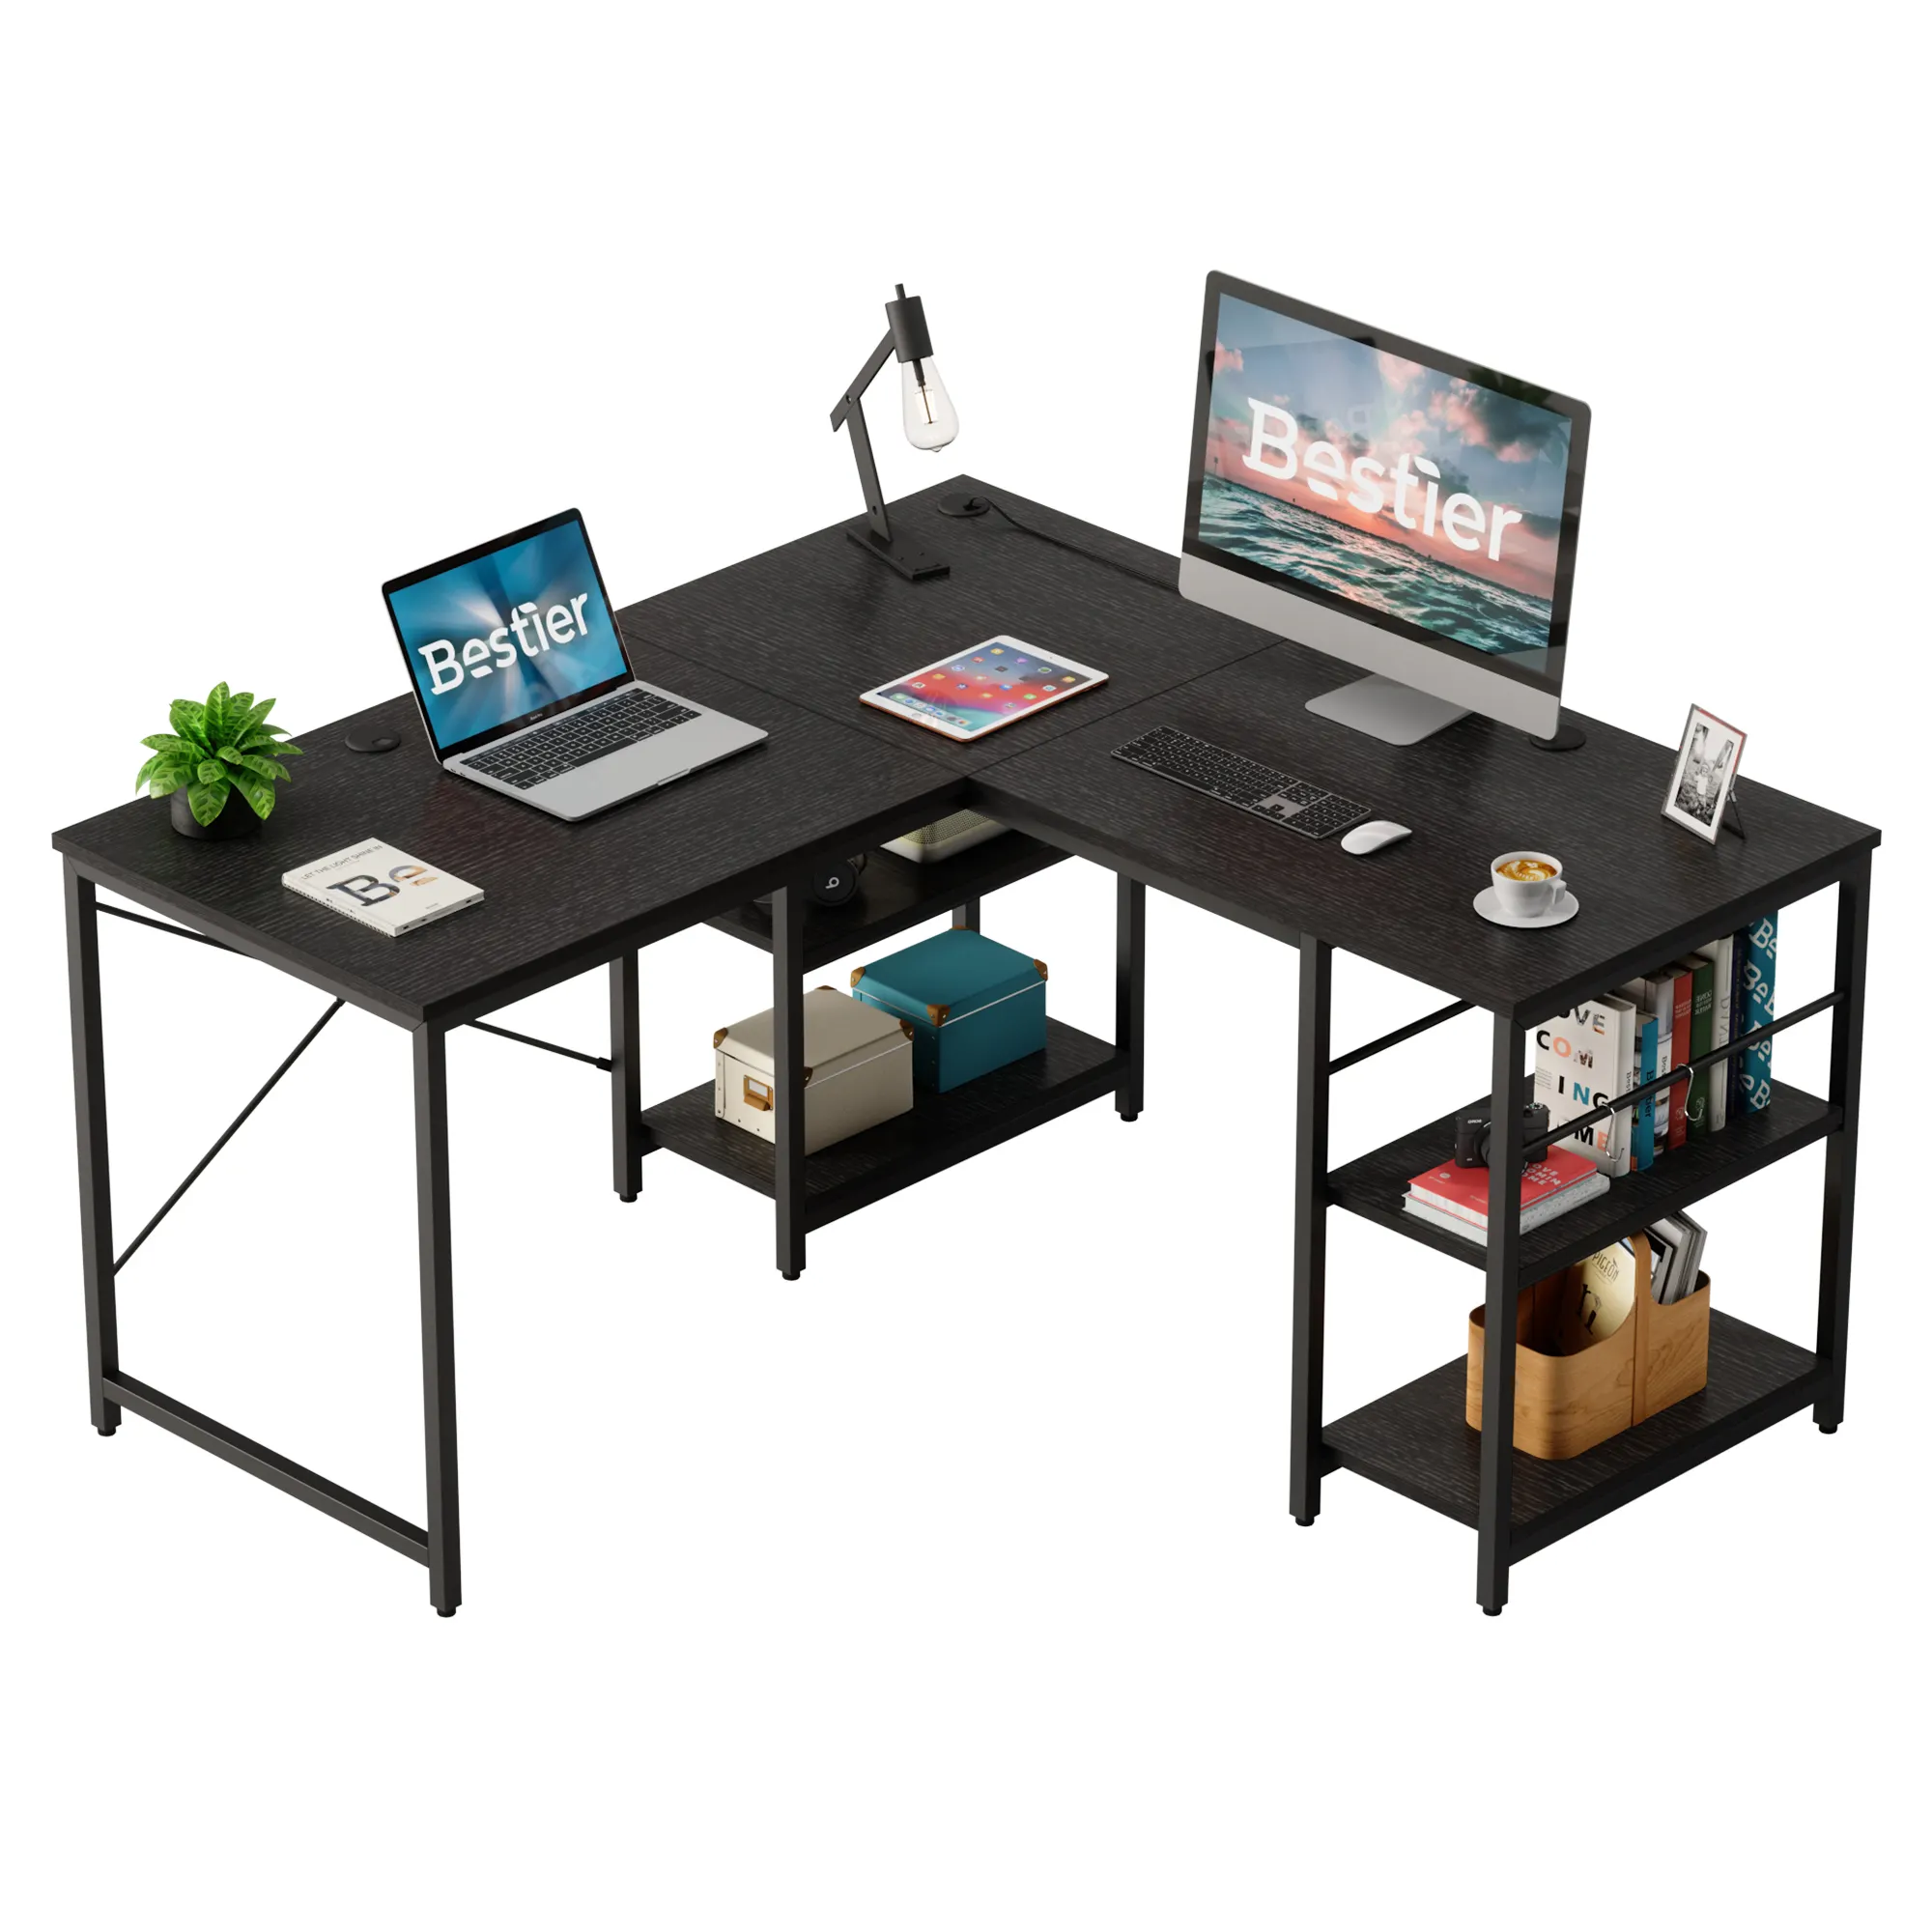 BESTIER Home Office Furniture Space Saving Wood Metal Frame L shaped Large Corner PC Computer Corner Table Desk with Storage She